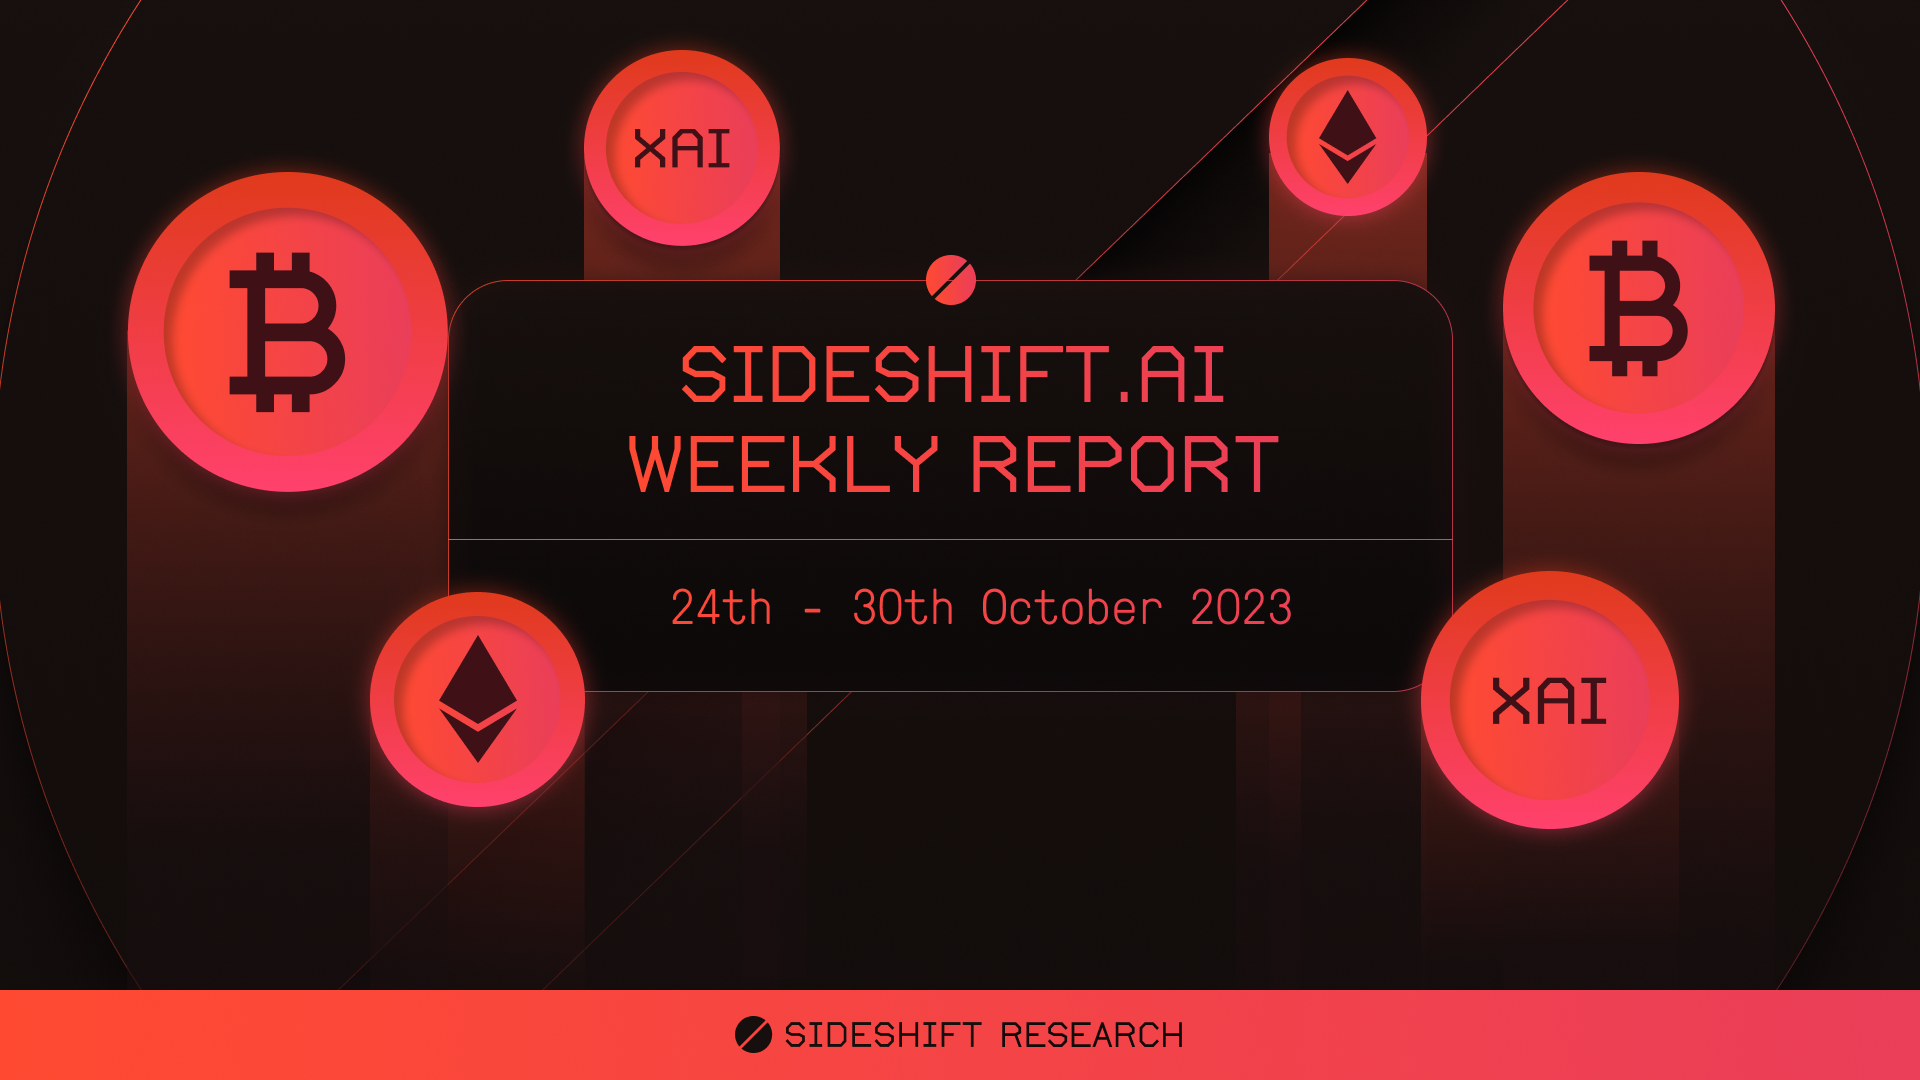 SideShift.ai Weekly Report | 24th - 30th October 2023